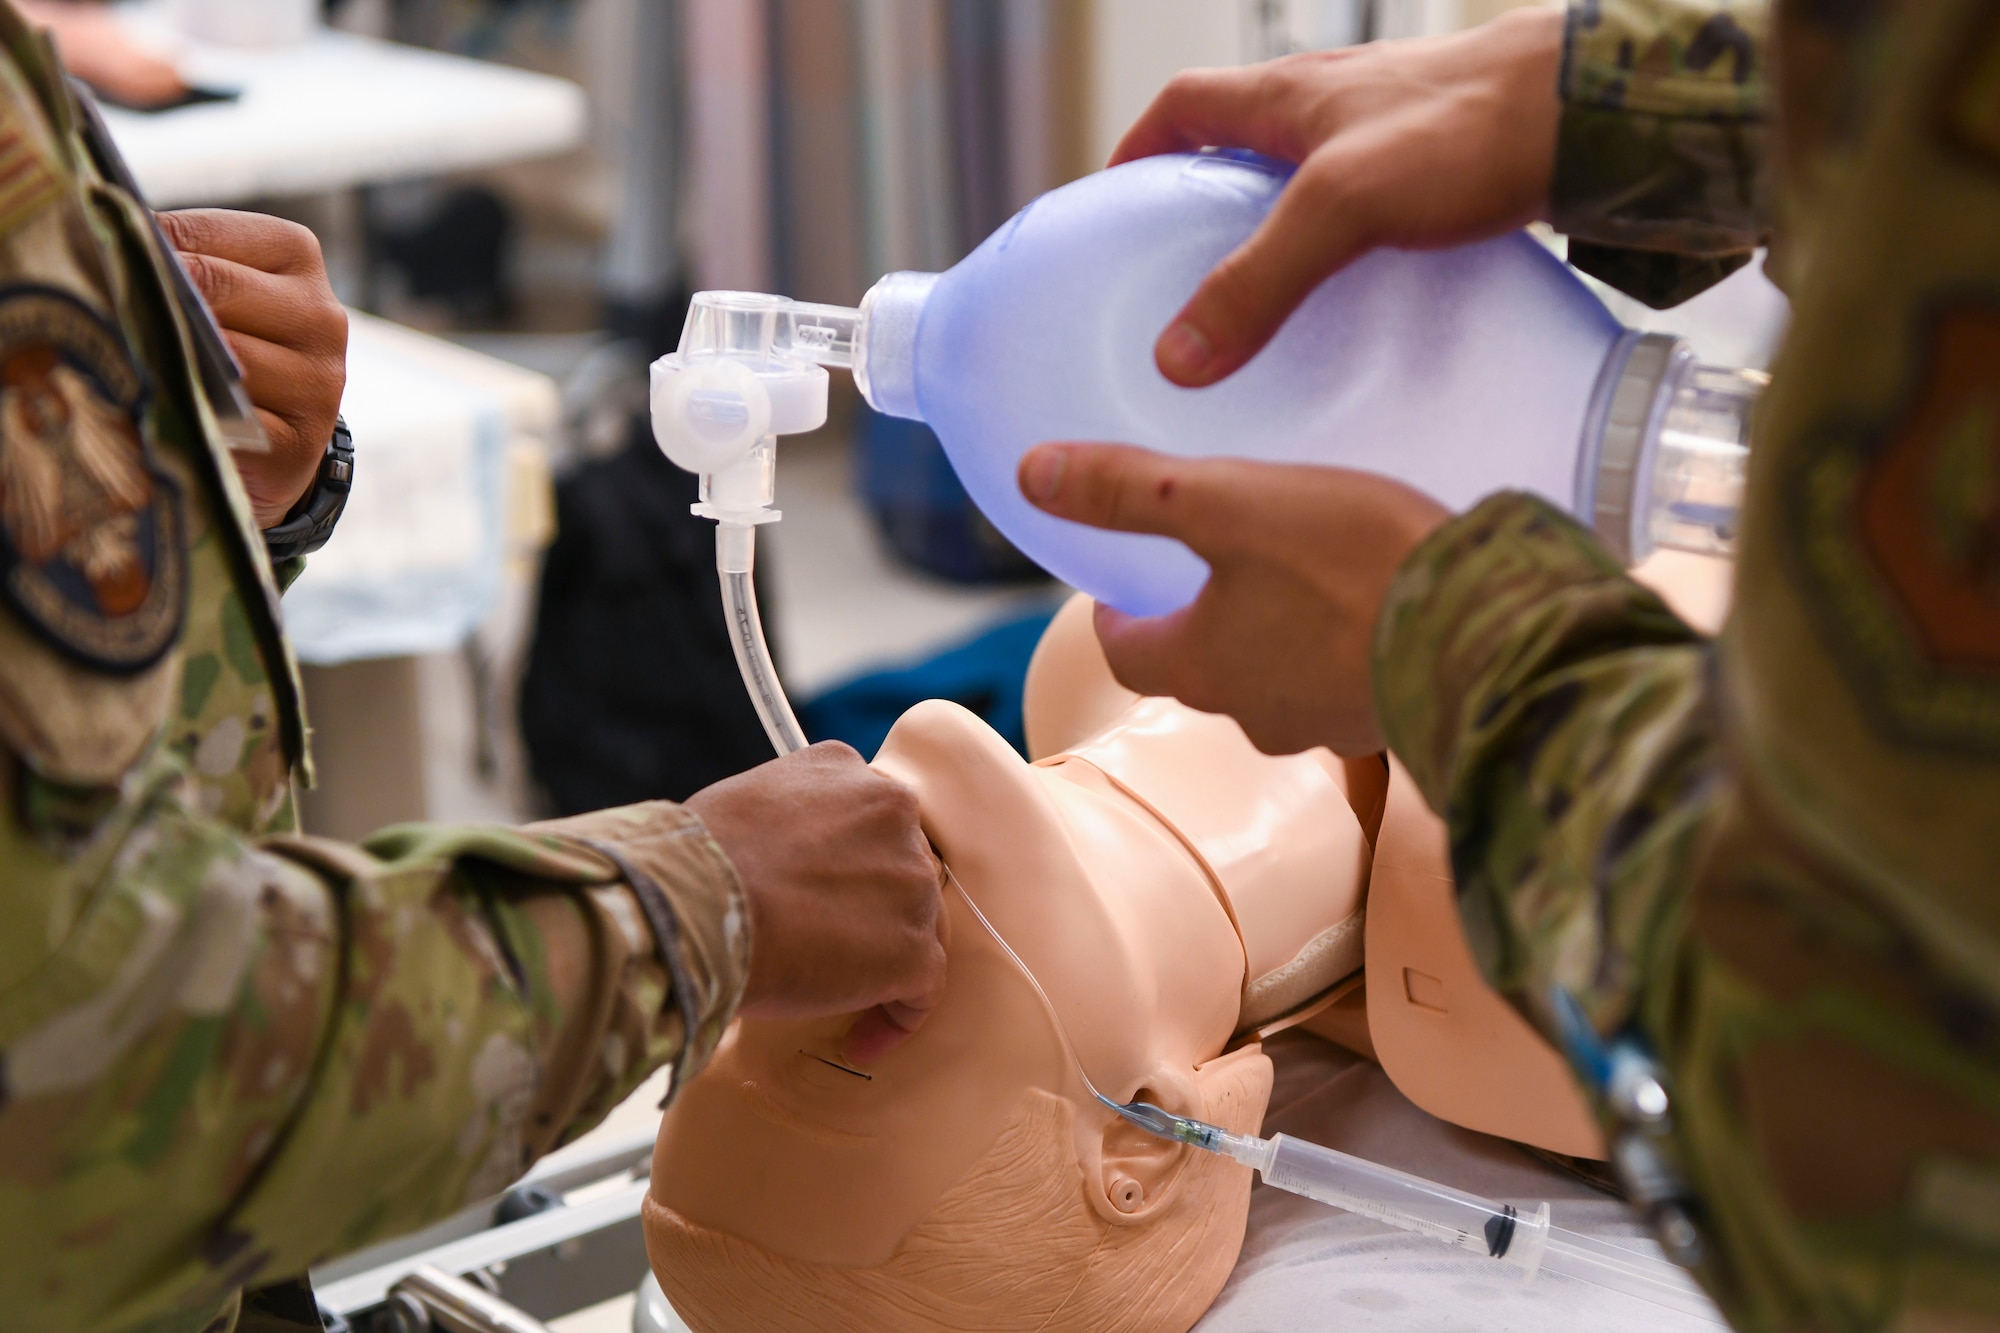 U.S. Air Force Airmen practice managing an airway on a training mannequin